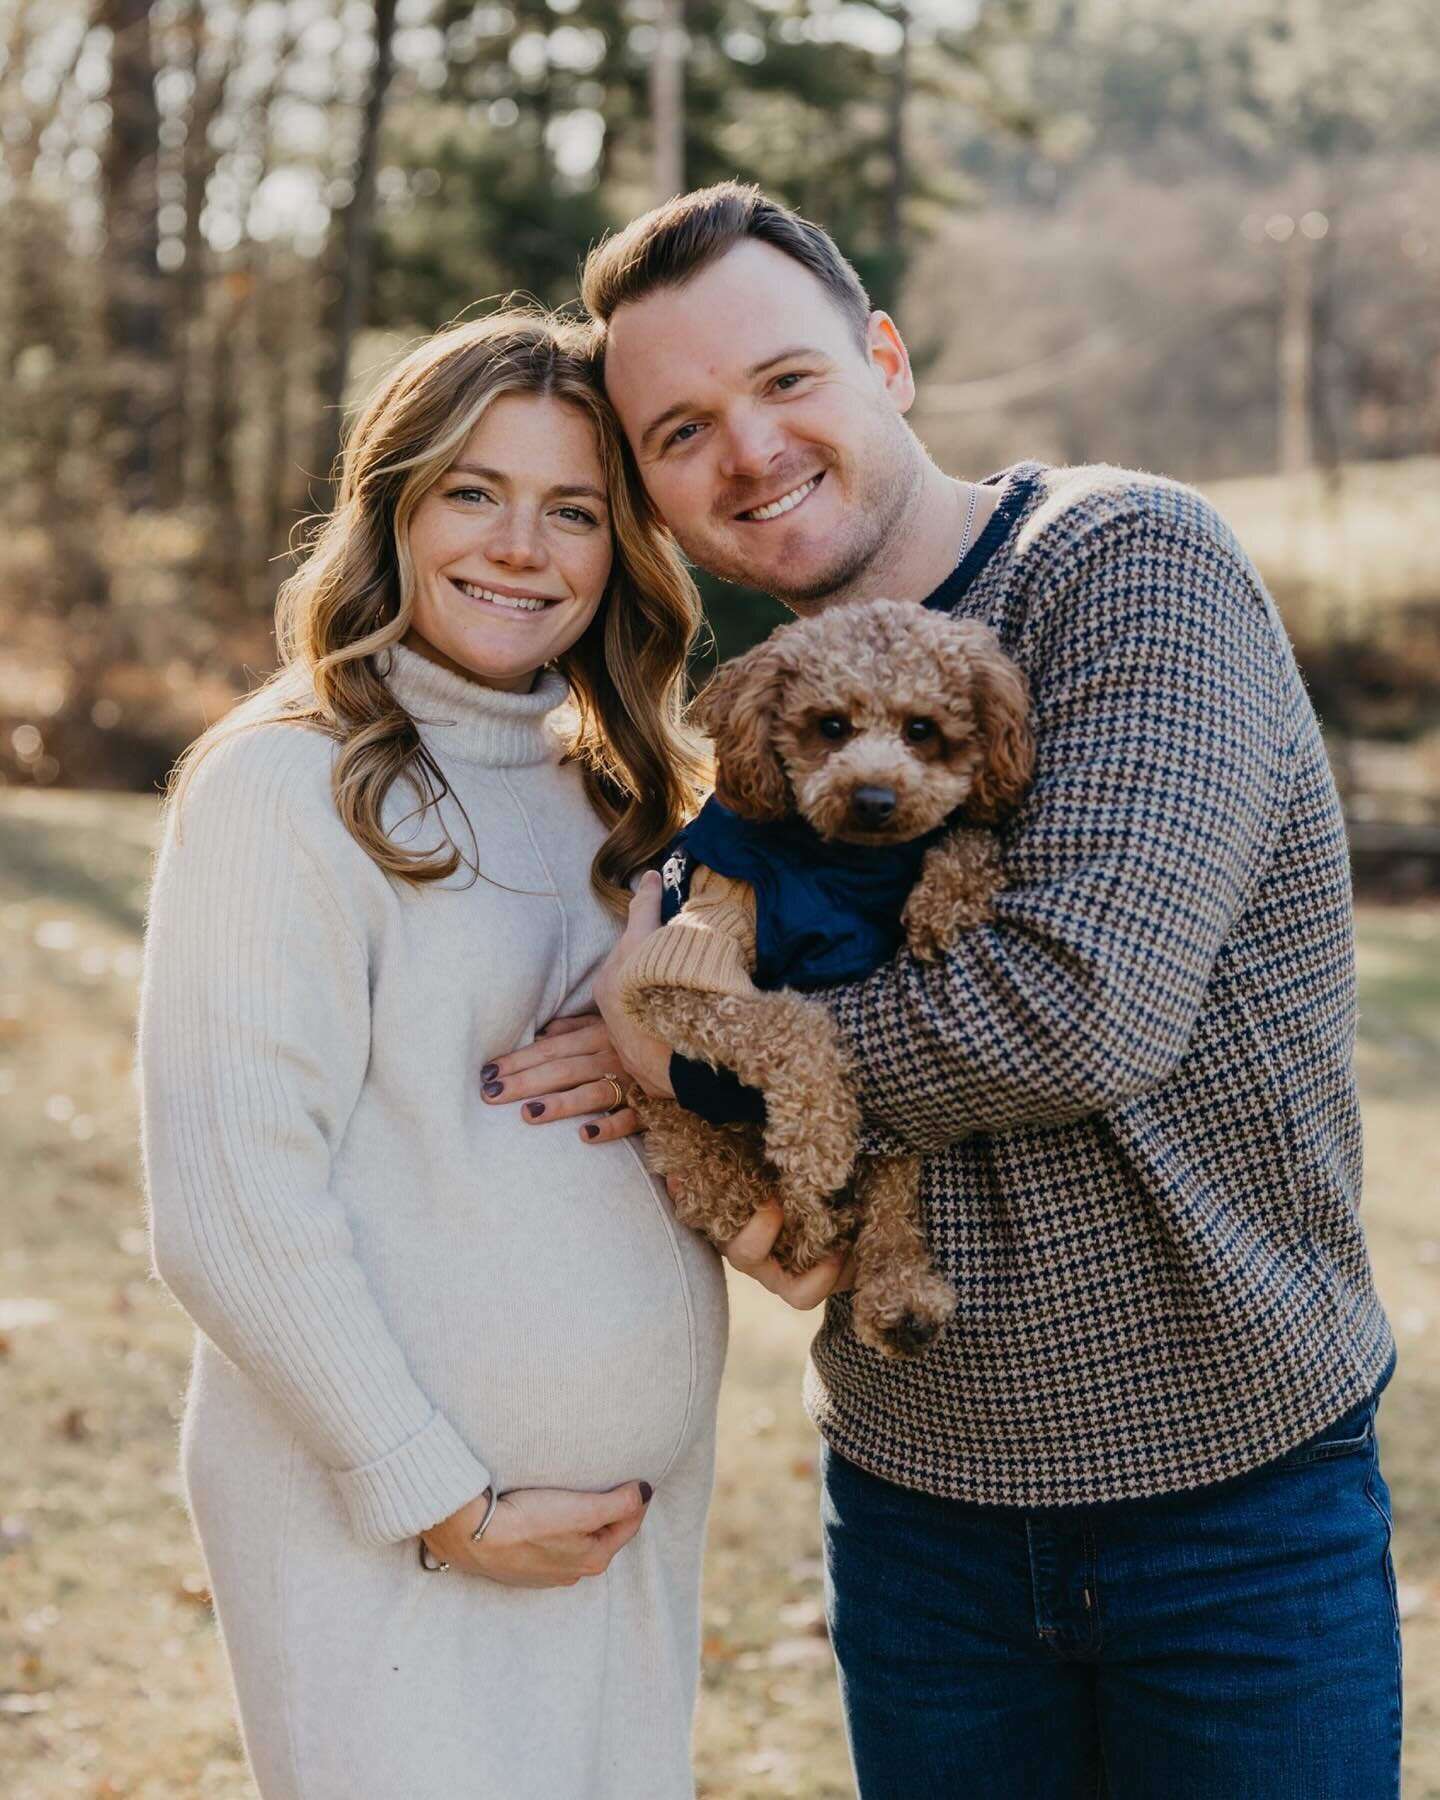 Hanging out with the Kesslers is always a good time. Stay tuned for newborn photos with little Margot!

#lizegbertphoto #portraitphotography #pittsburghphotographer #hartwoodacresmansion #maternitypictures #maternity #babygirl #furrysiblinglove #fall